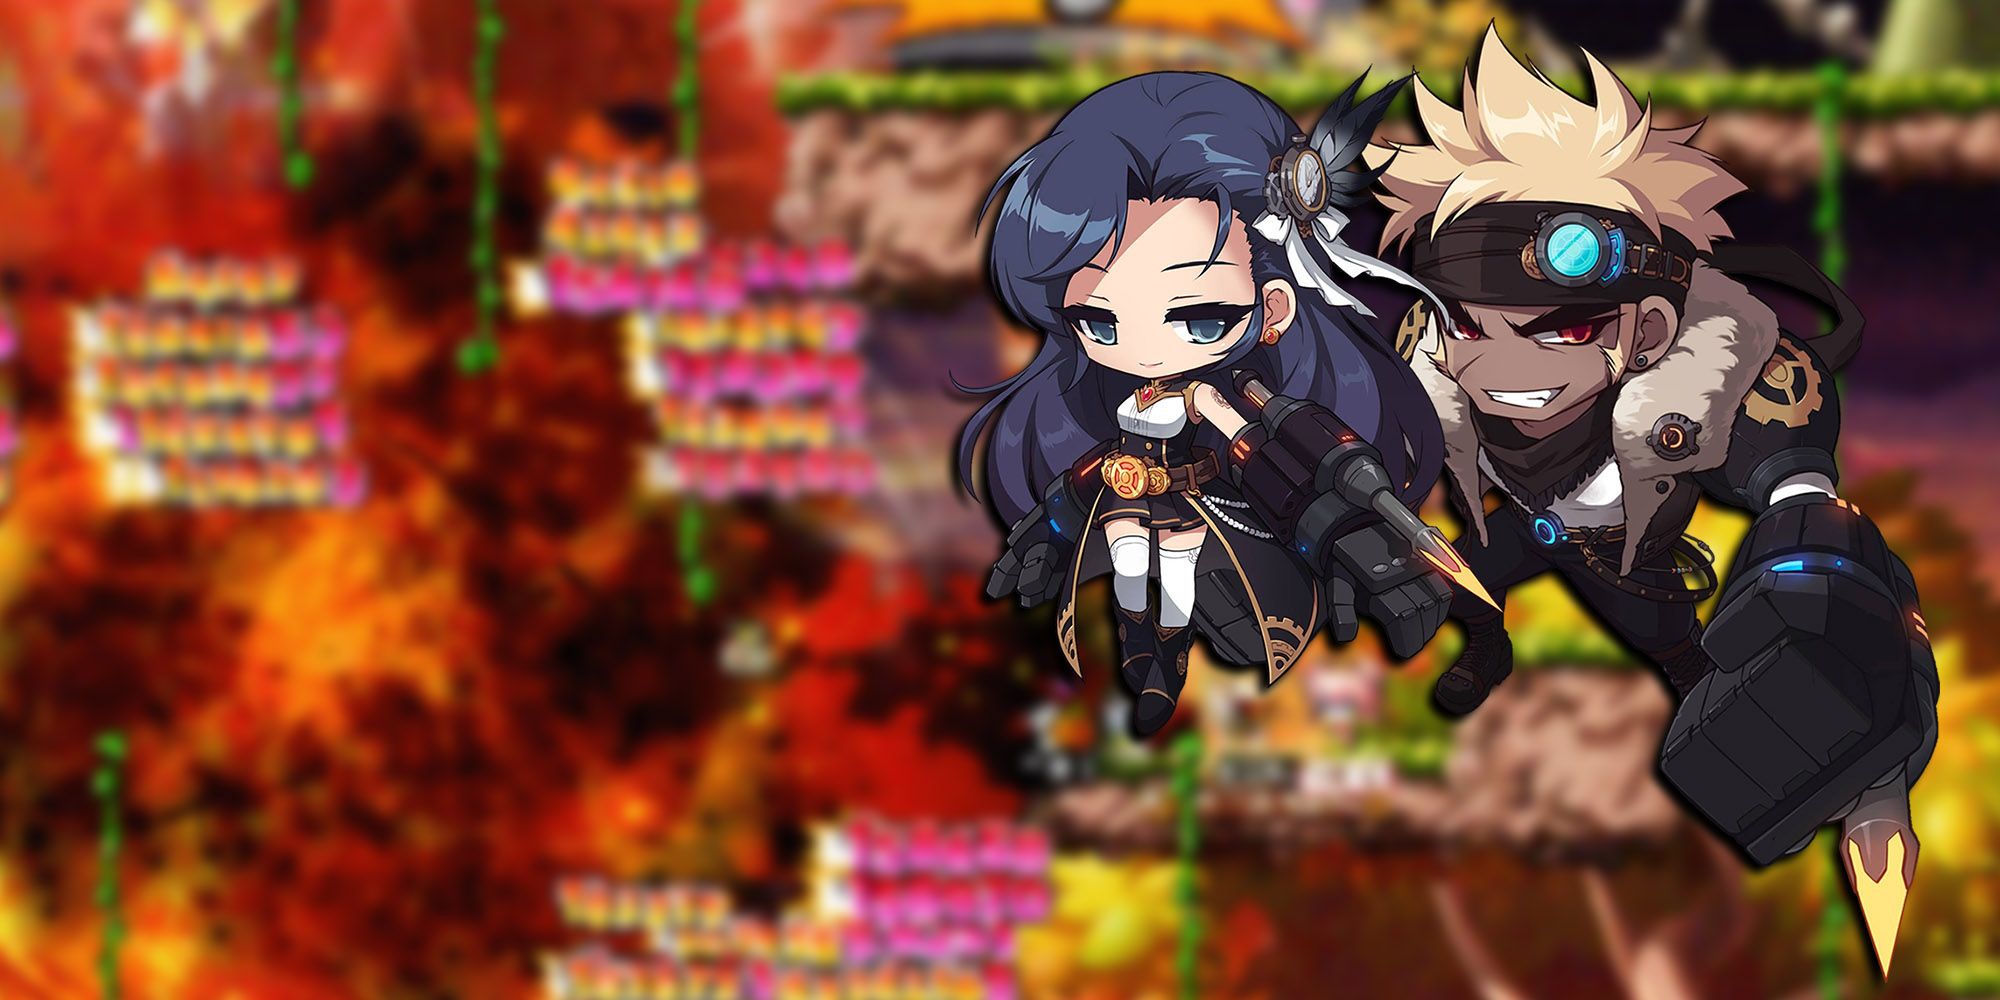 Maplestory - Blaster Using Hyper Magnum Punch With PNG Of Both Types Of Blaster On Top